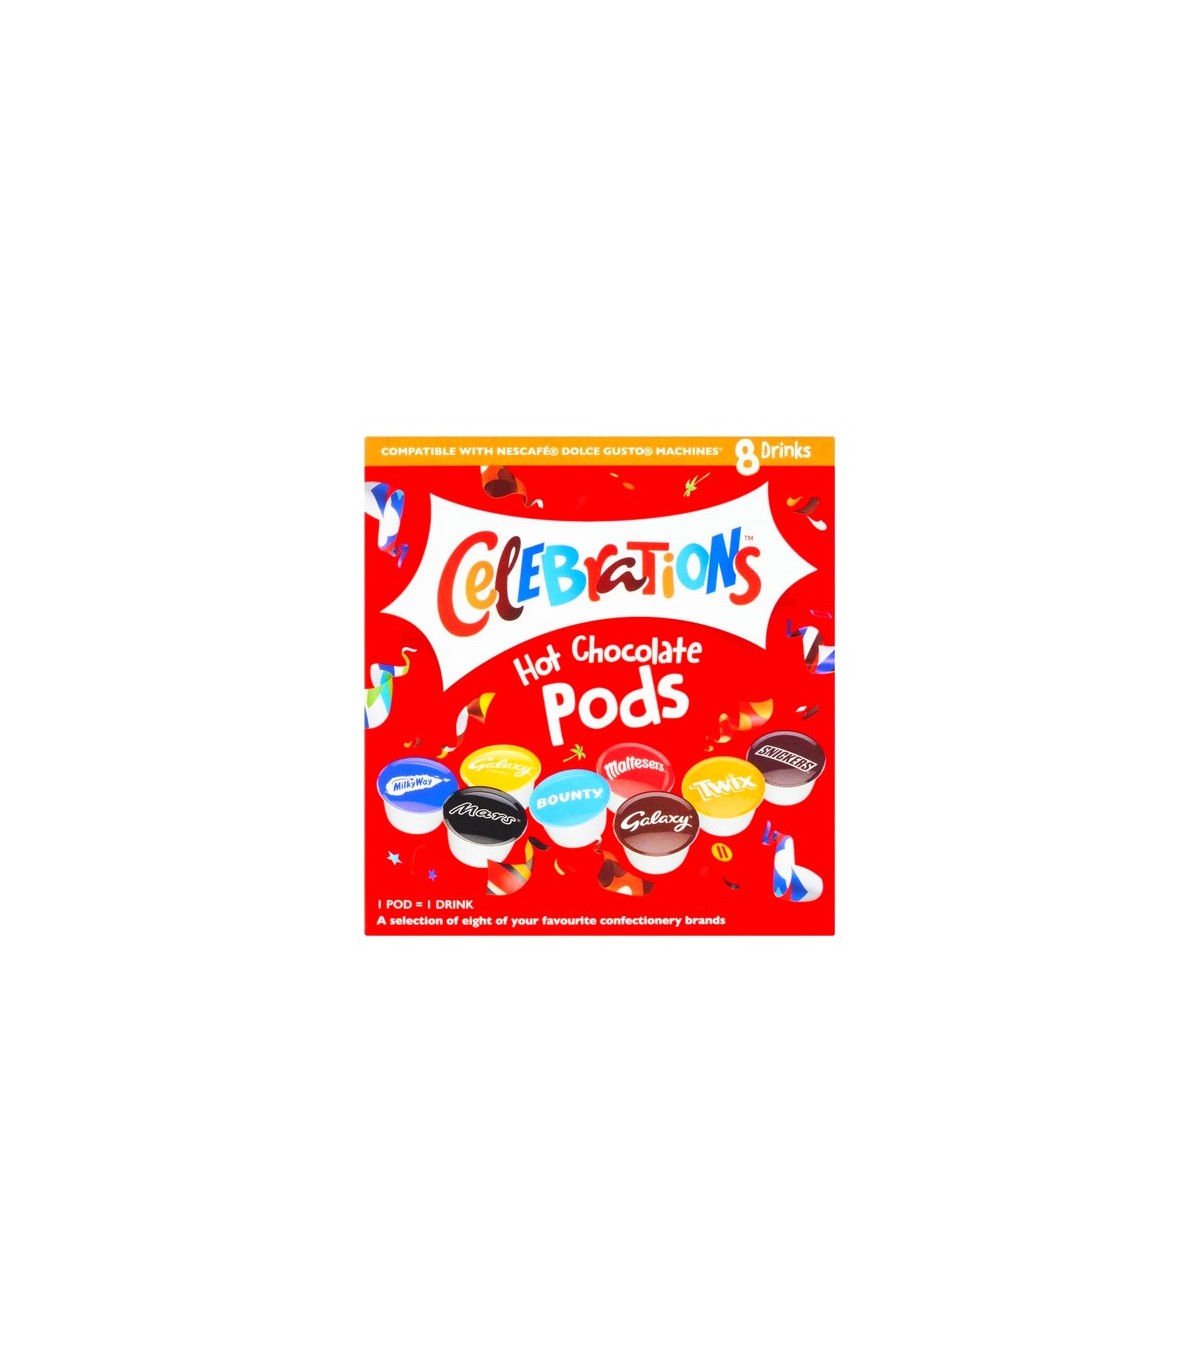 Mars - Hot Chocolate (Dolce Gusto Compatible) - 5x 8 Pods